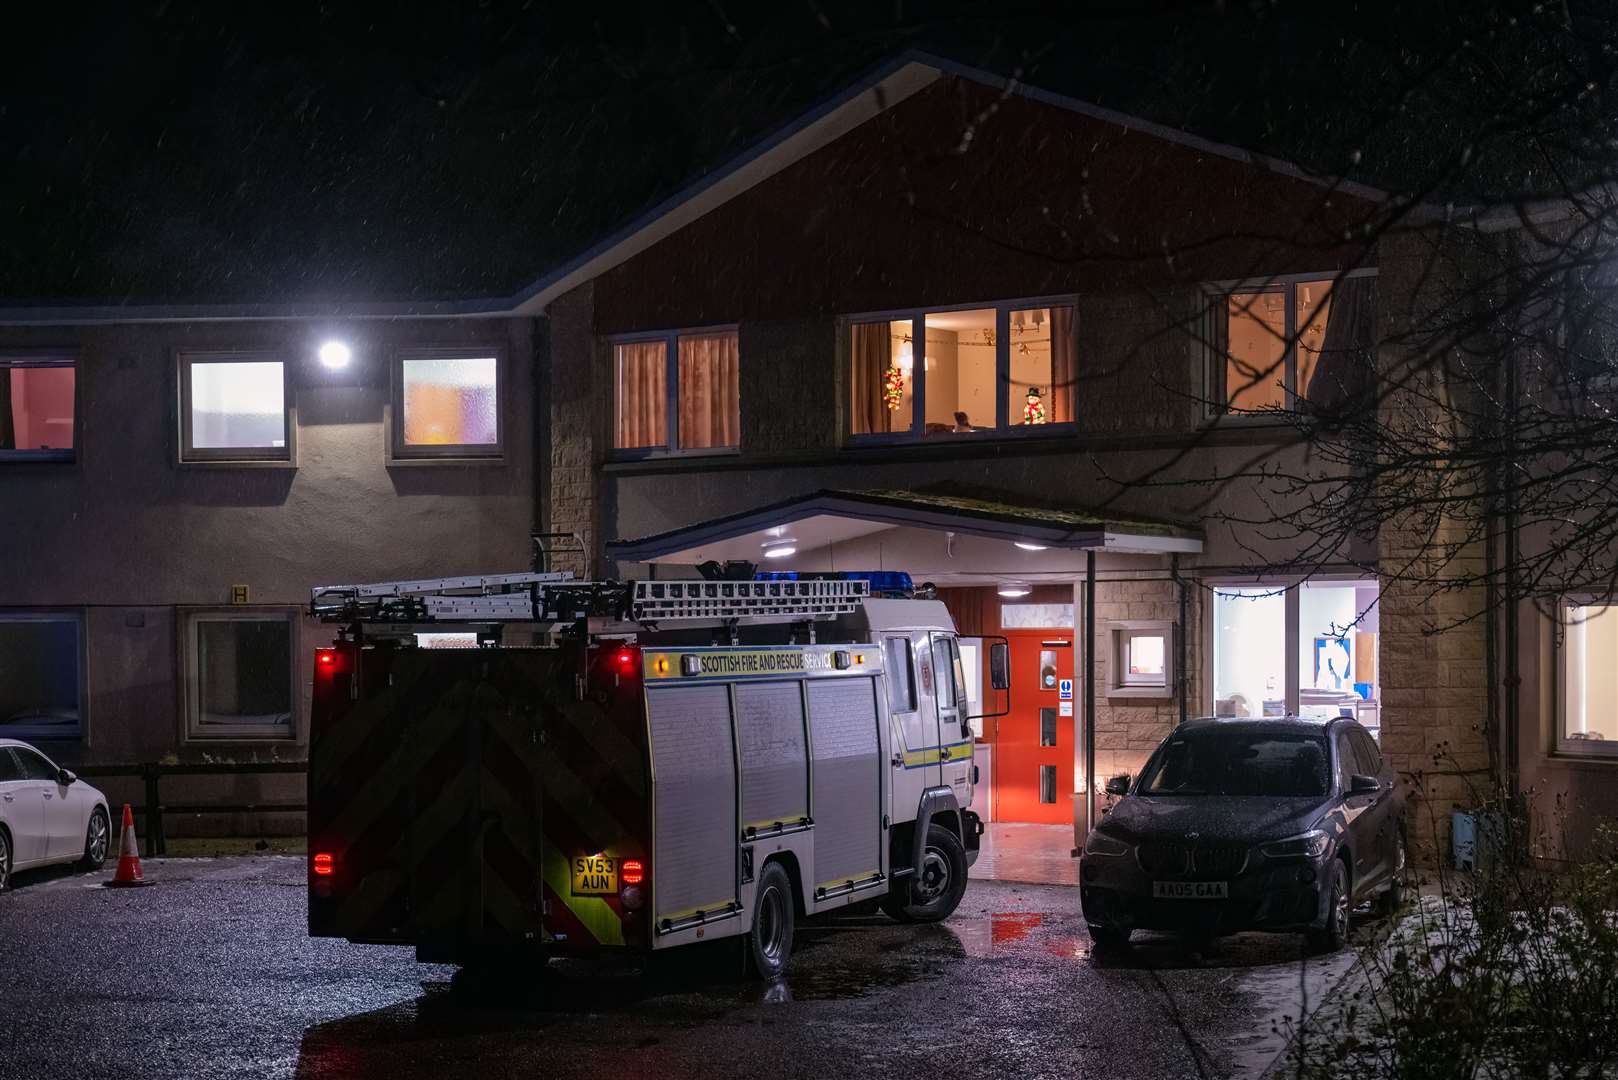 Durnhythe Care Home, in Porstoy, where four fire appliances, two police units and an ambulance attended on the evening of December 14, 2022. Picture: Jasperimage